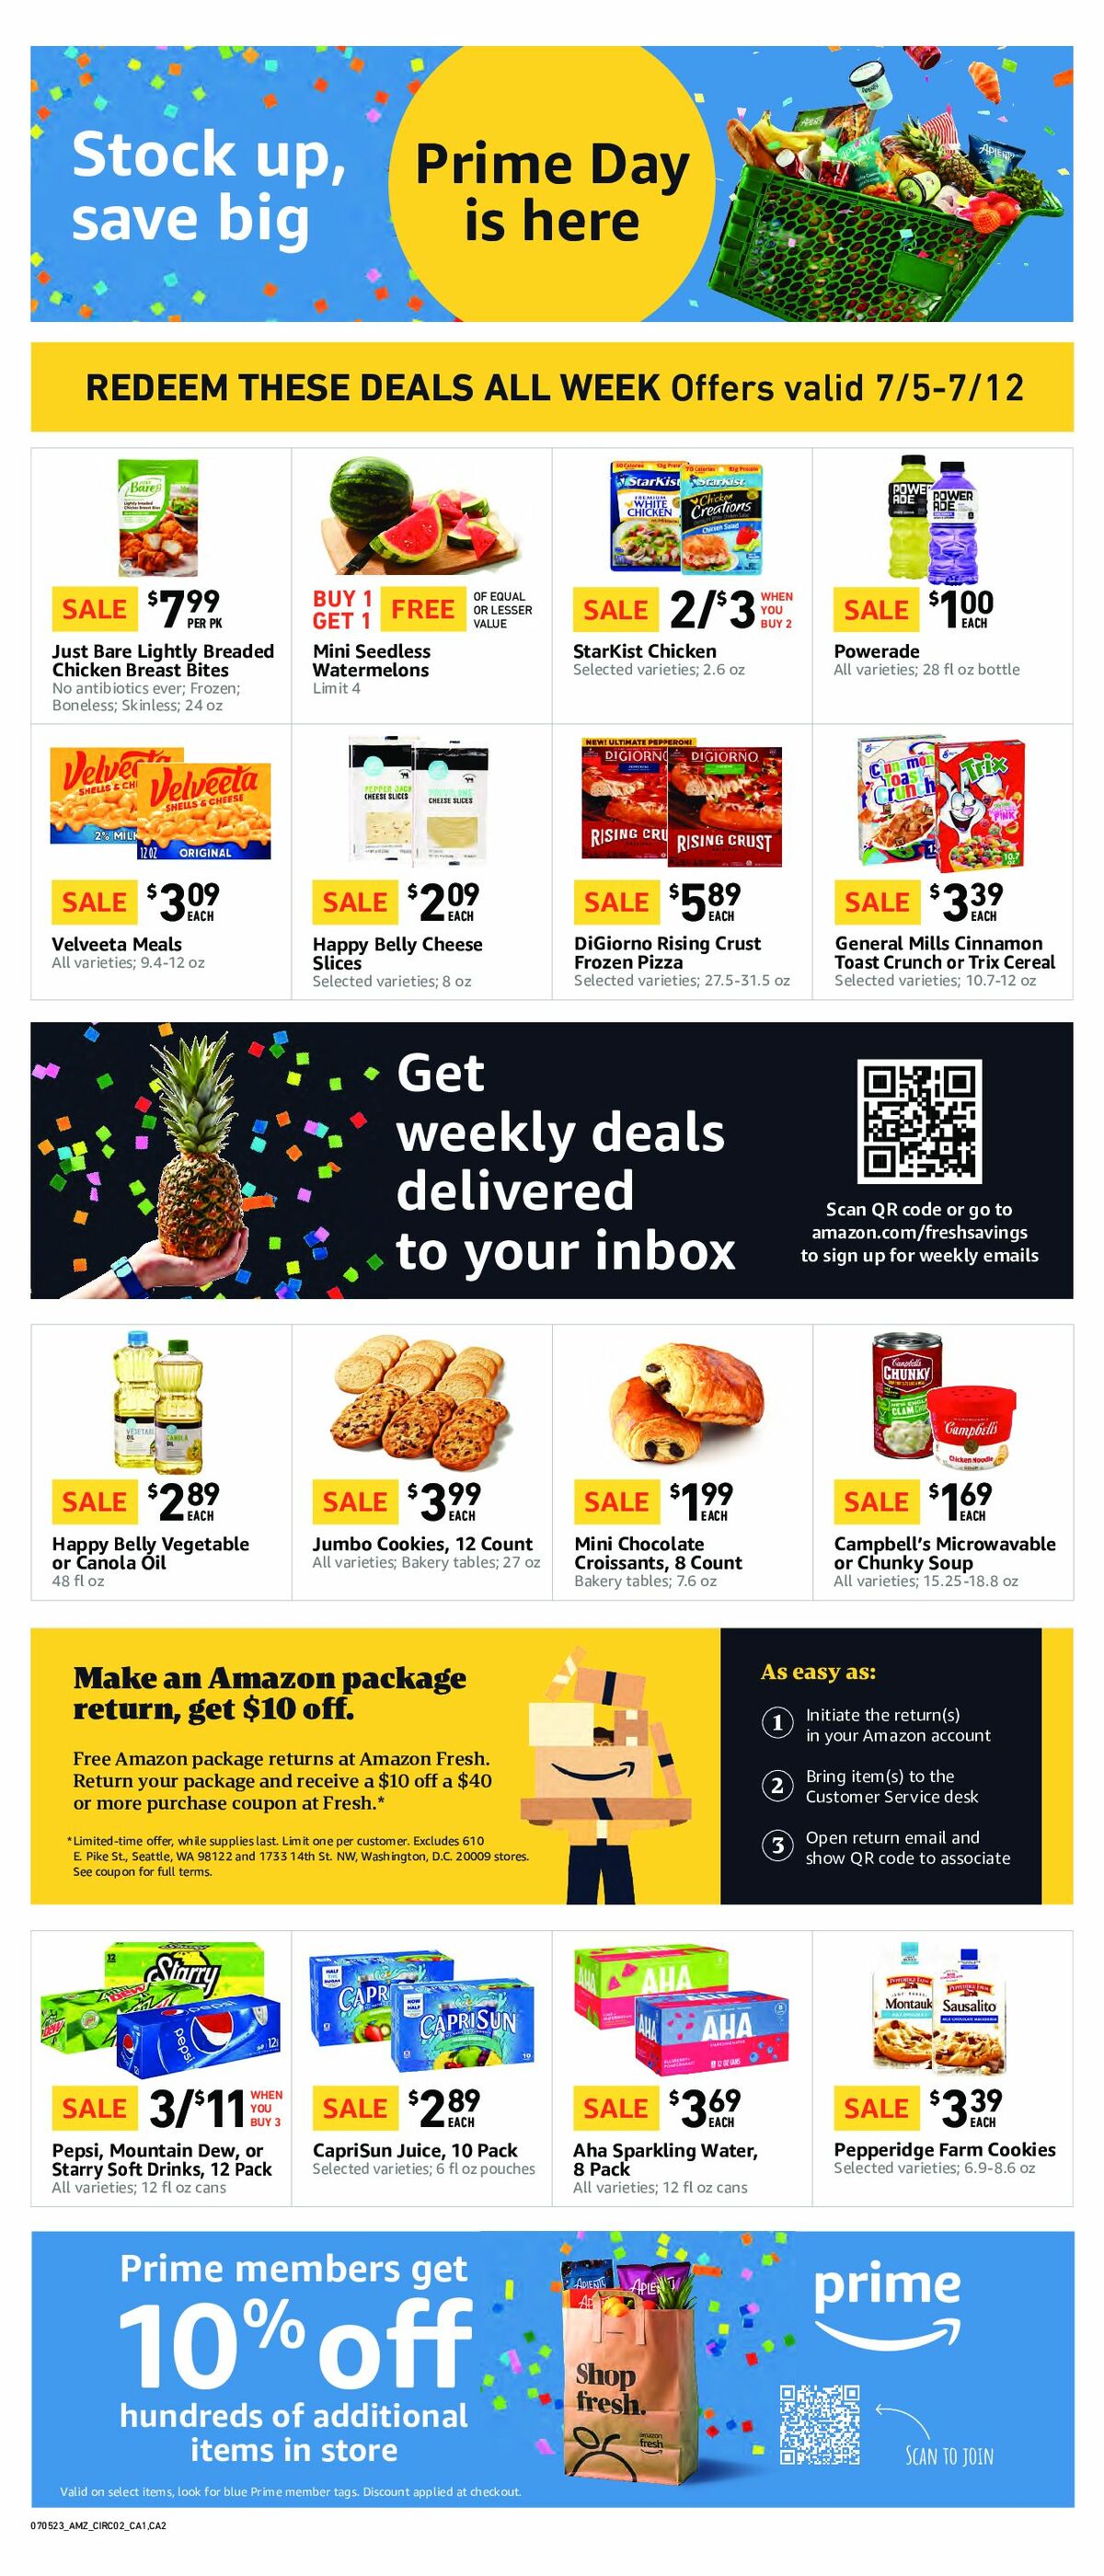 Amazon Fresh Weekly Ad from July 5